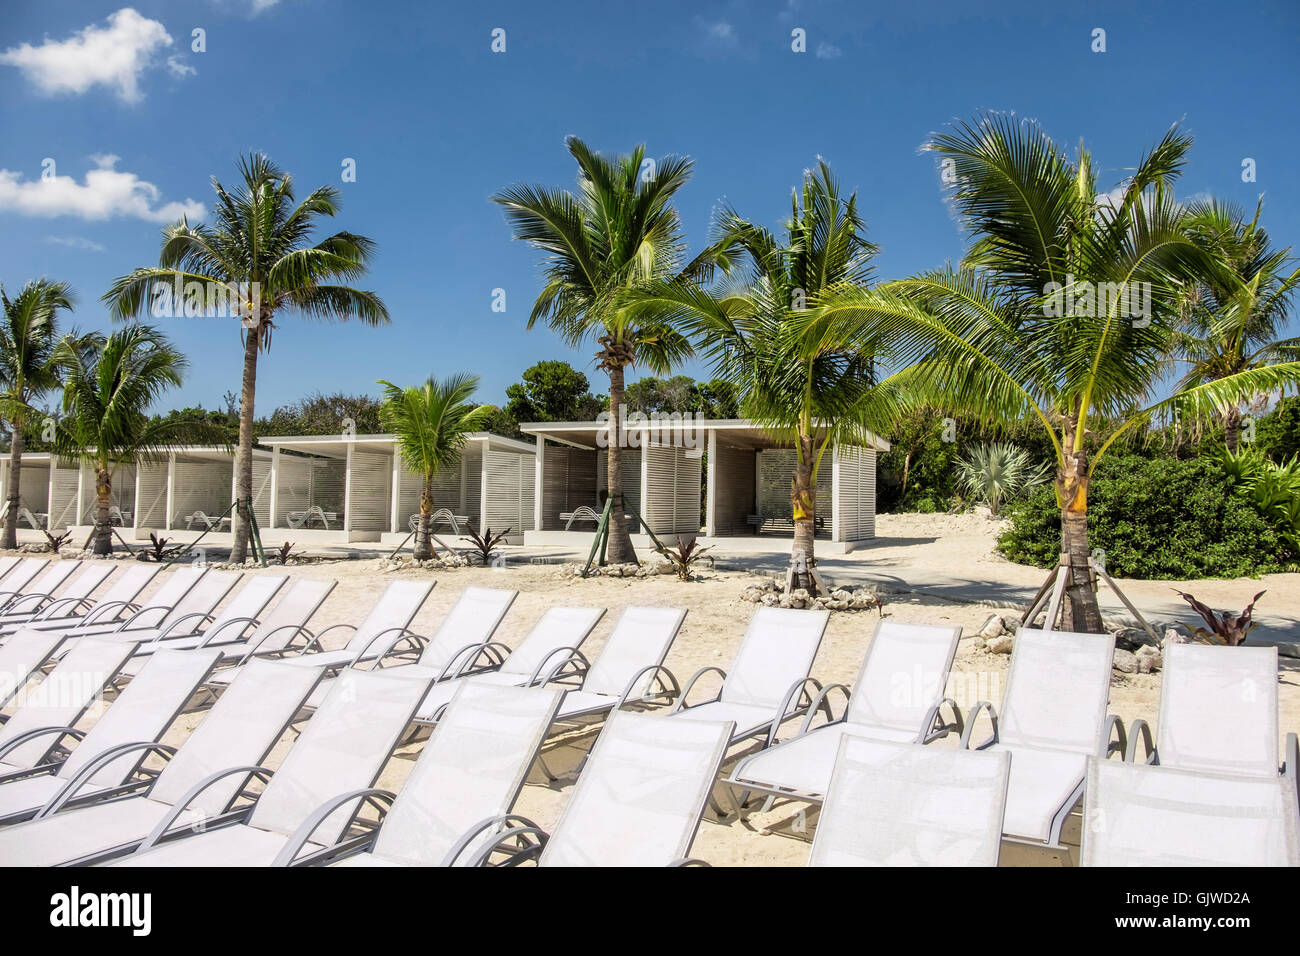 Sun loungers at a tropical beach resort in the bahamas Stock Photo